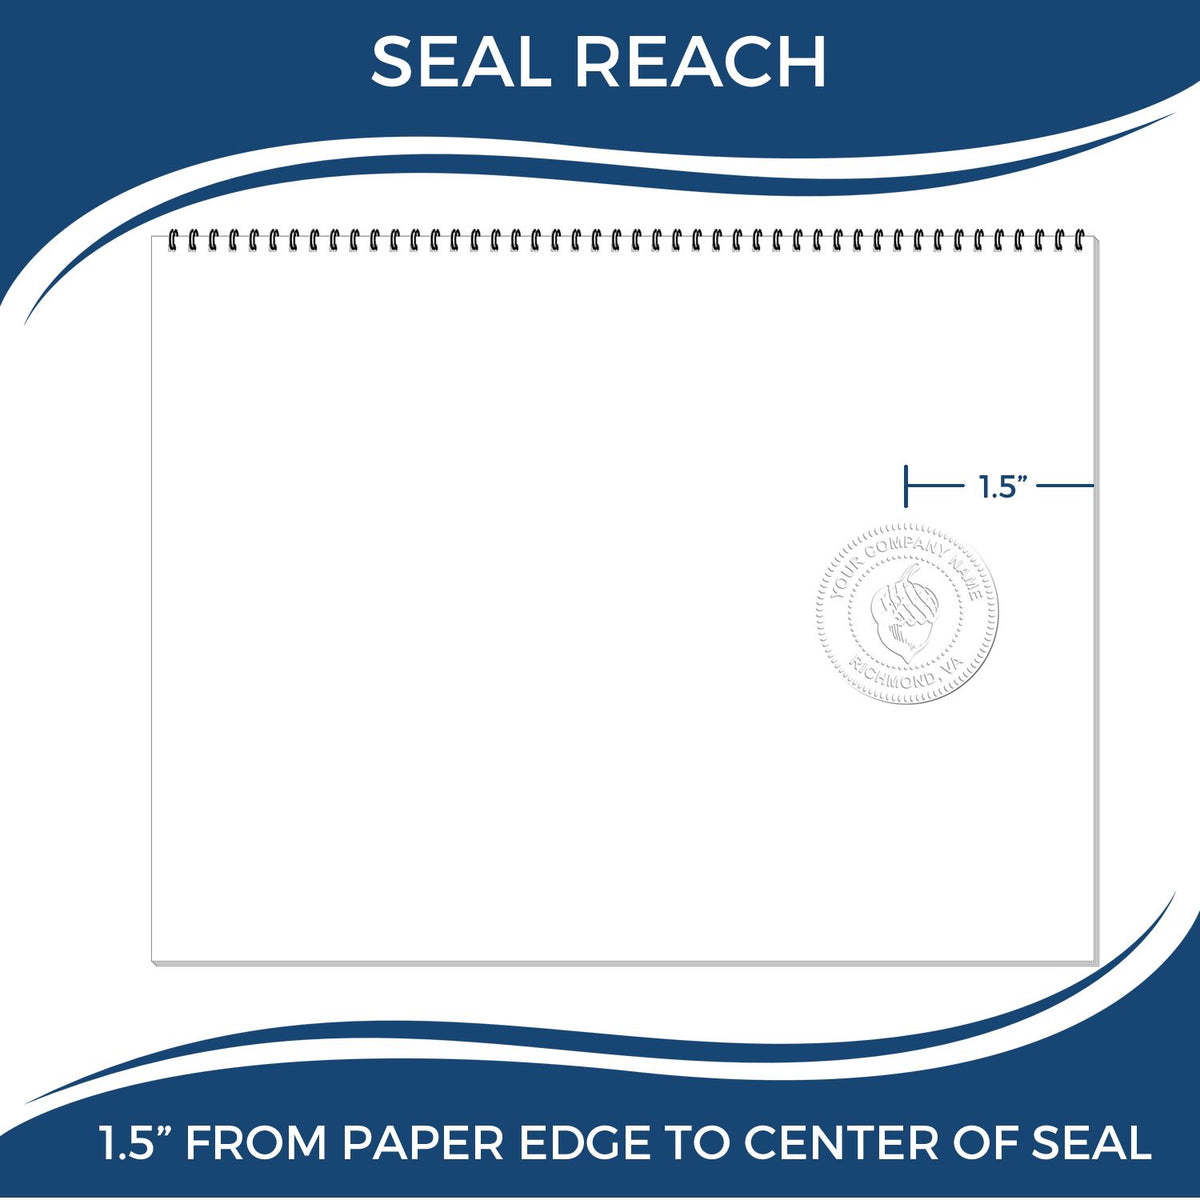 An infographic showing the seal reach which is represented by a ruler and a miniature seal image of the Alabama Engineer Desk Seal